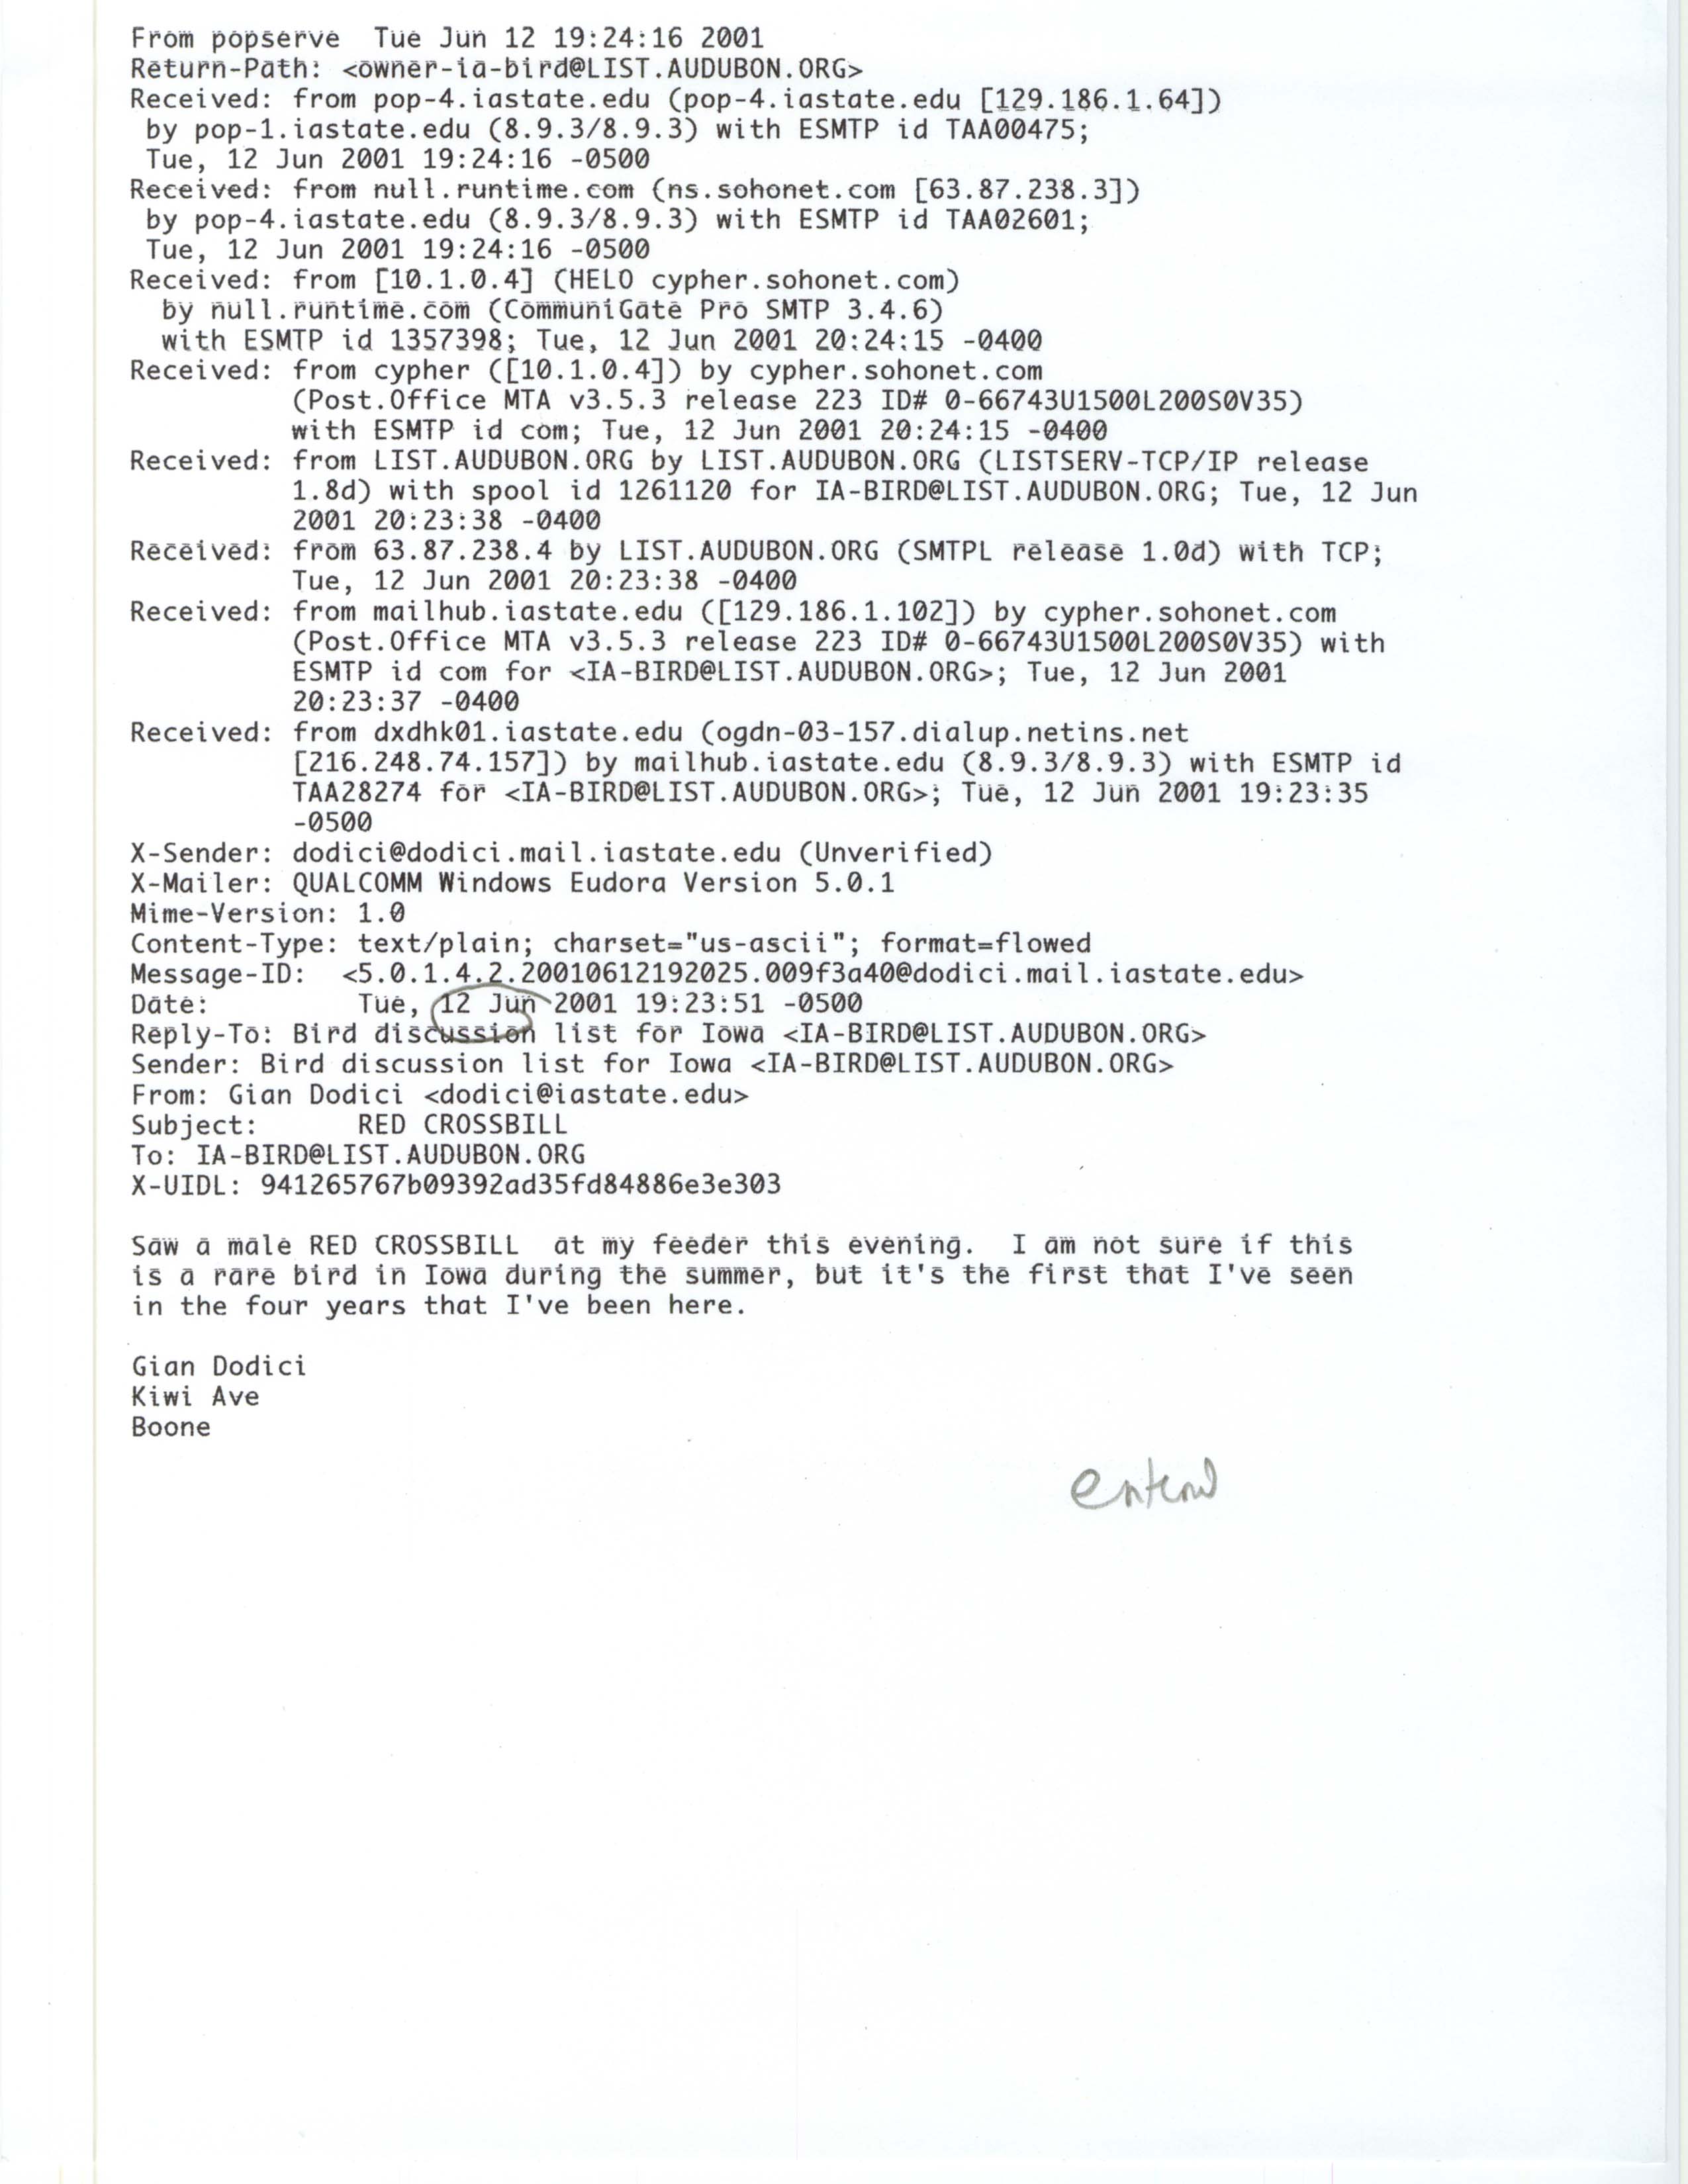 Gian Dodici email to IA-BIRDS mailing list regarding the sighting of a Red Crossbill, June 12, 2001